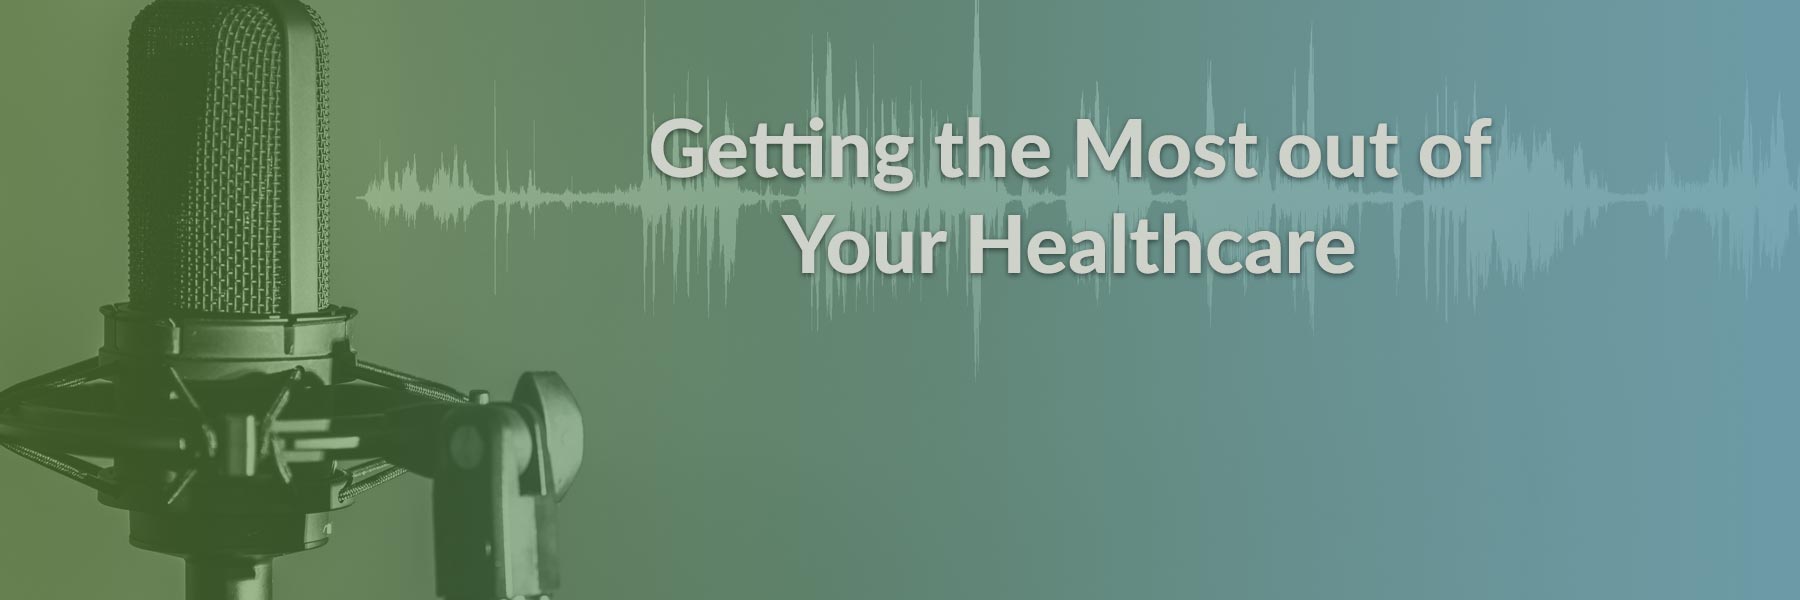 Getting the Most out of your Healthcare